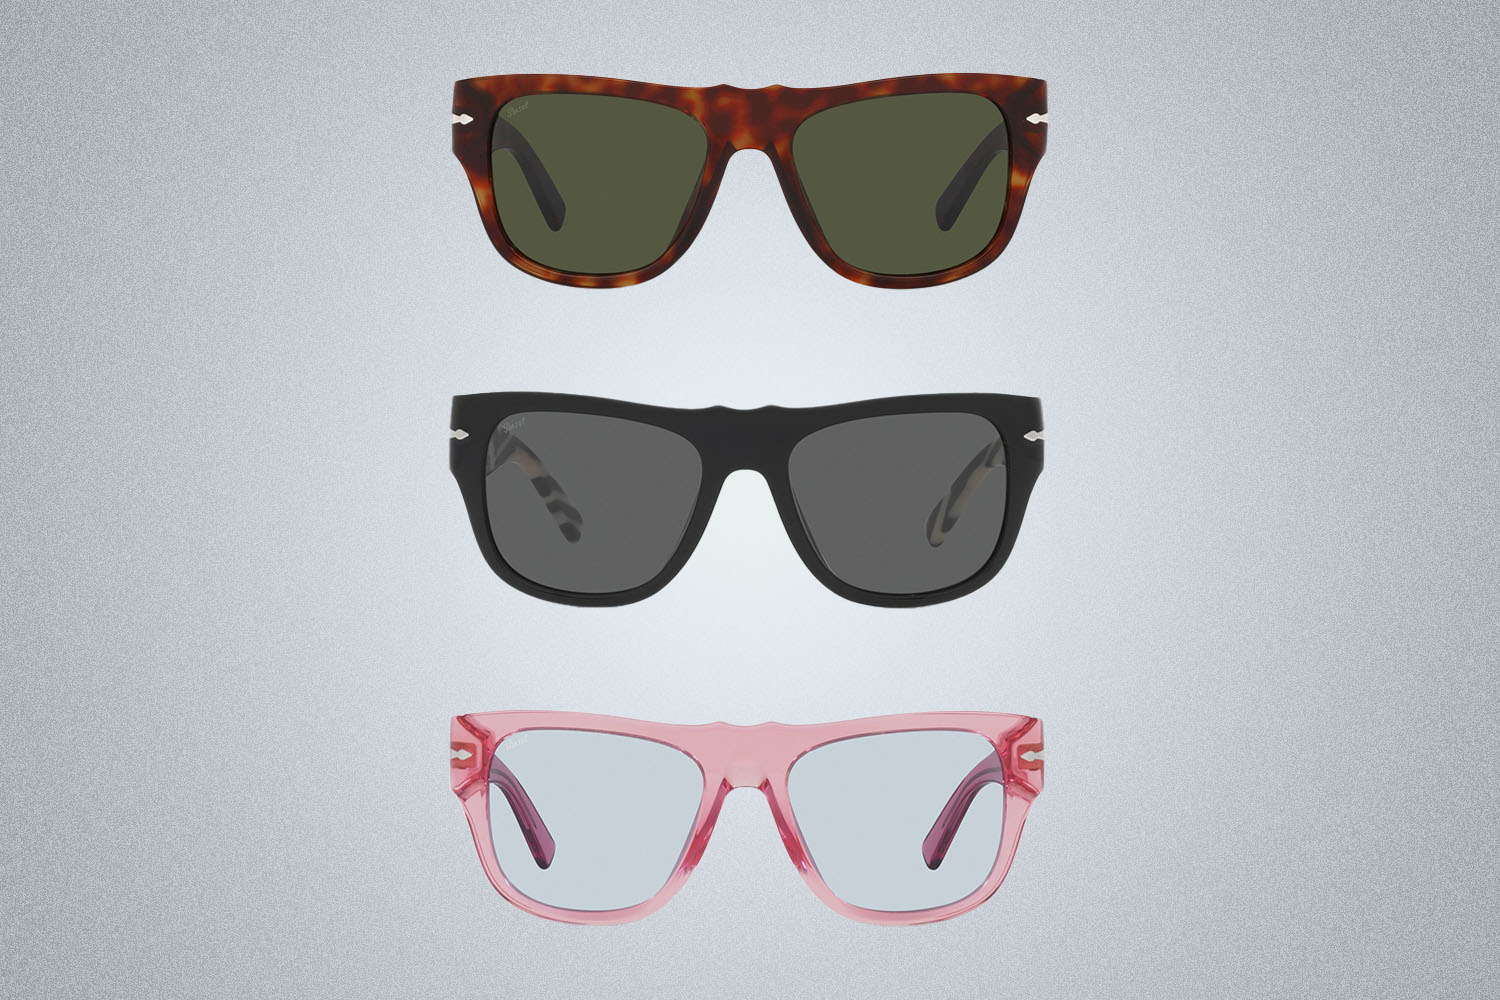 A trio of different colored Dolce&Gabbana x Persol sunglasses on a gray background